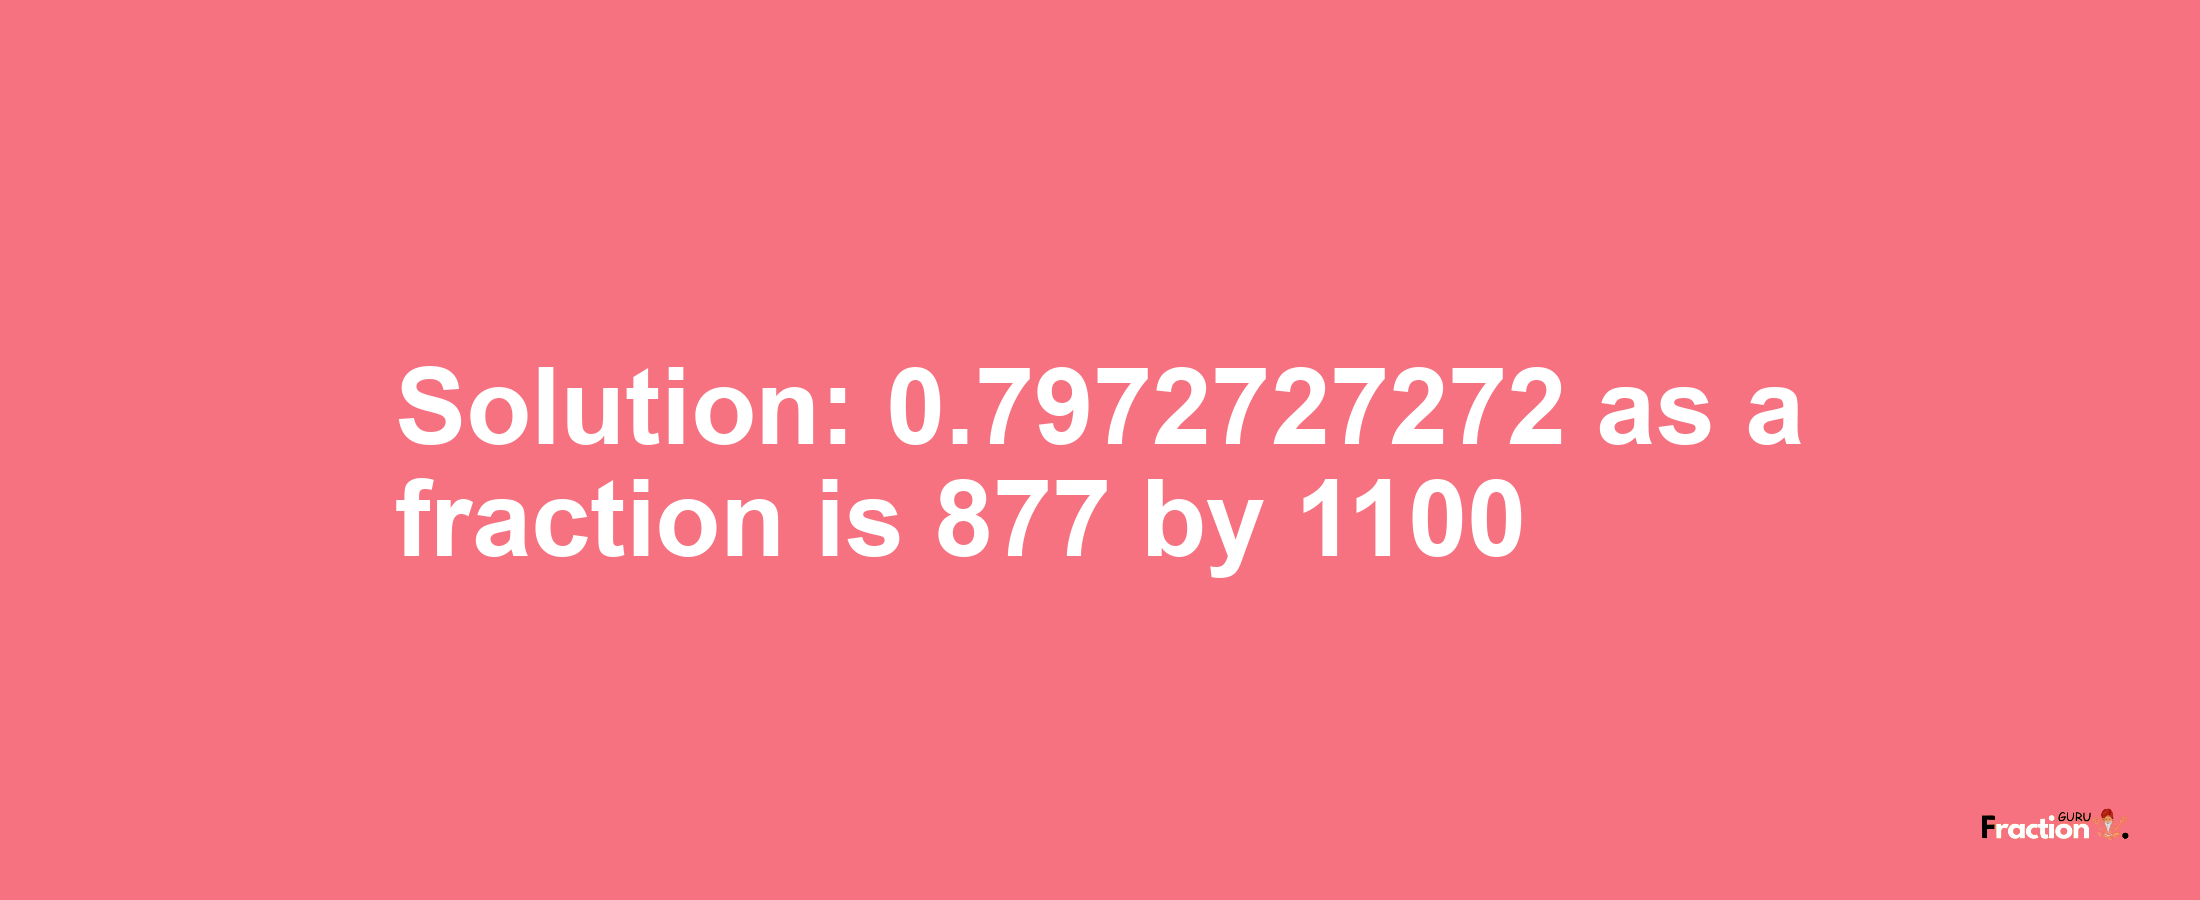 Solution:0.7972727272 as a fraction is 877/1100